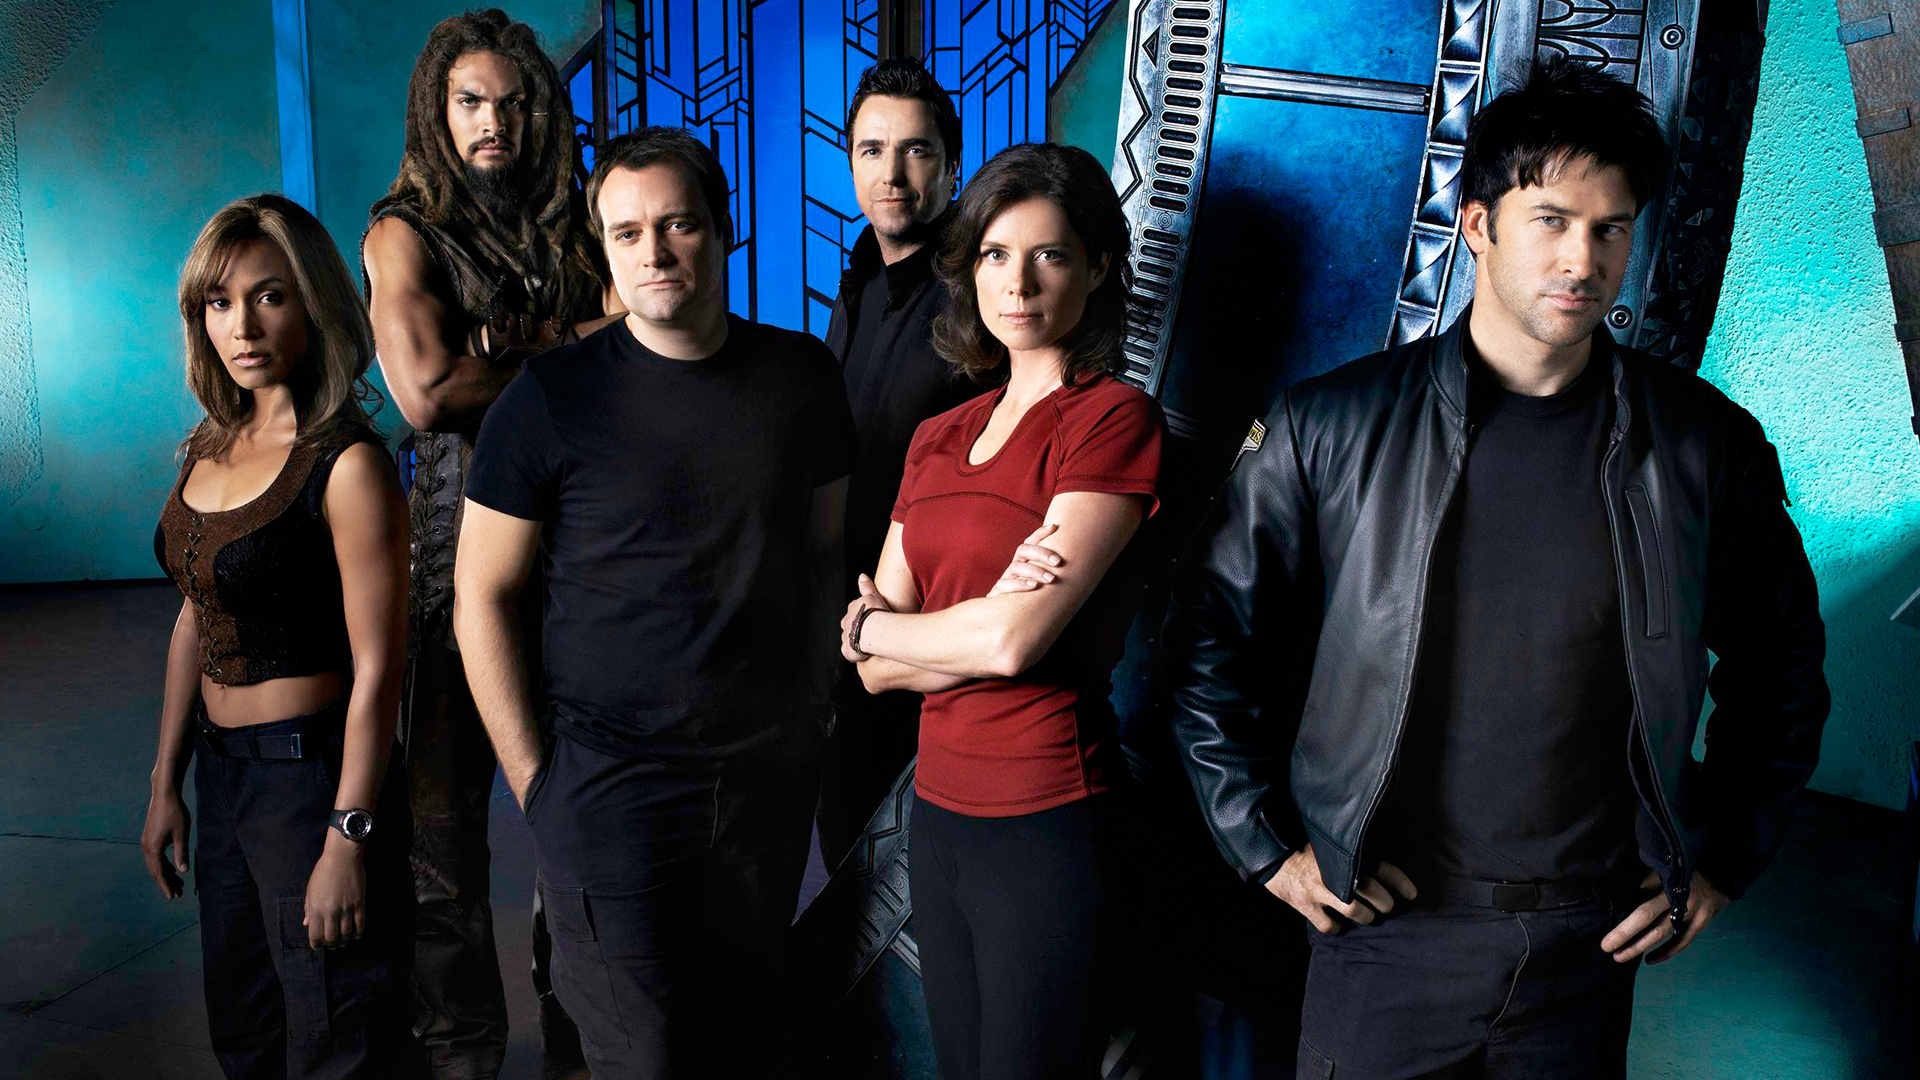 the cast of stargate atlantis doing an extremely 2000s cast pose